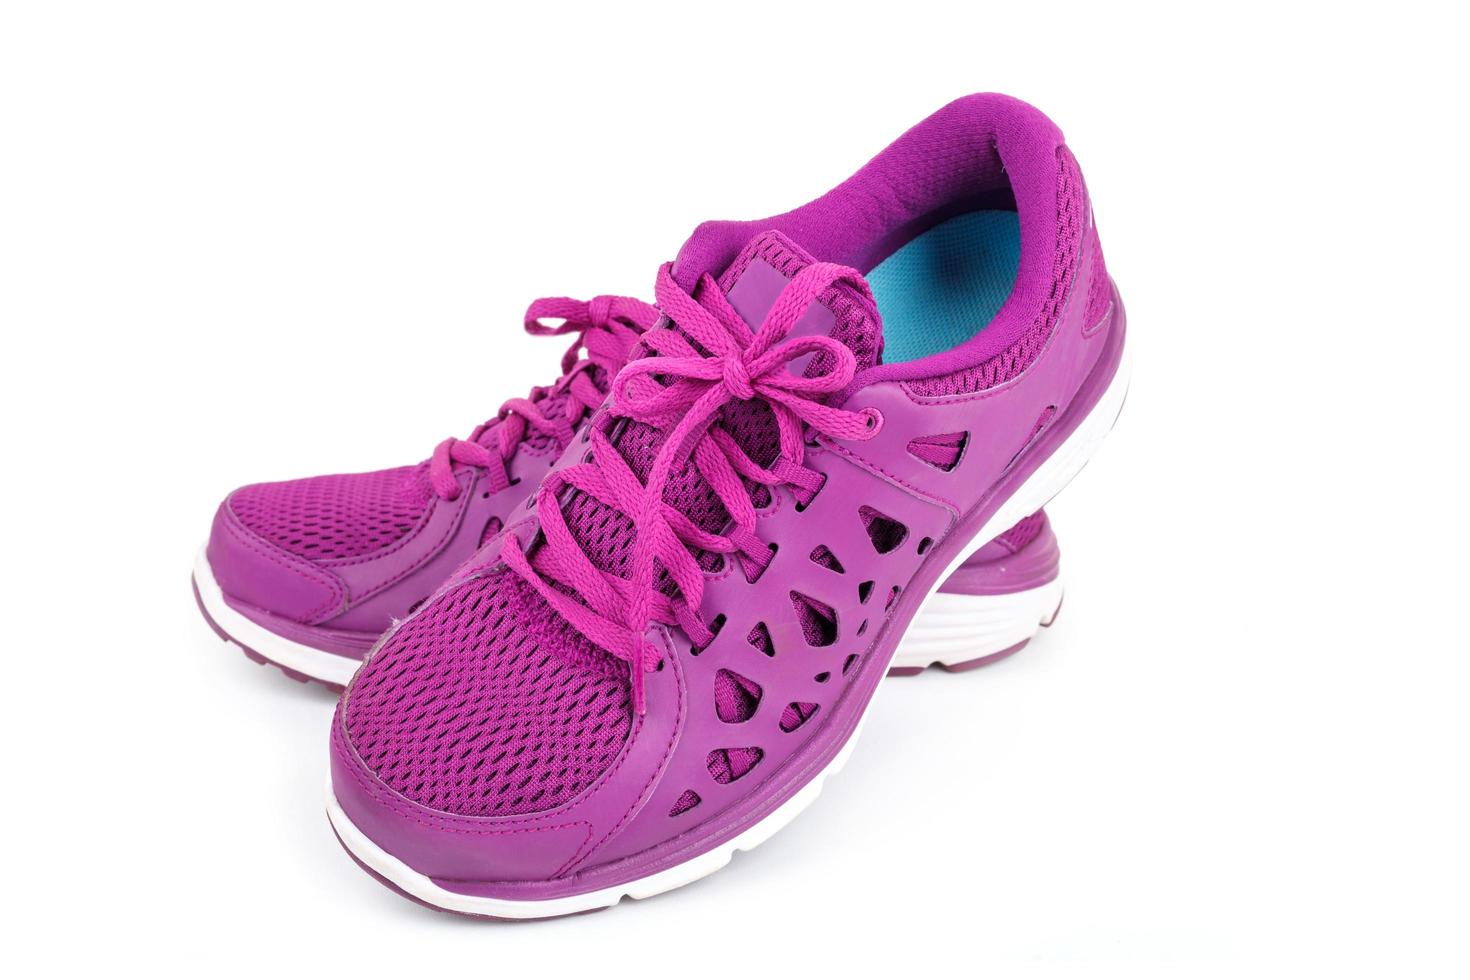 Violet sport running shoes isolated on white background photo